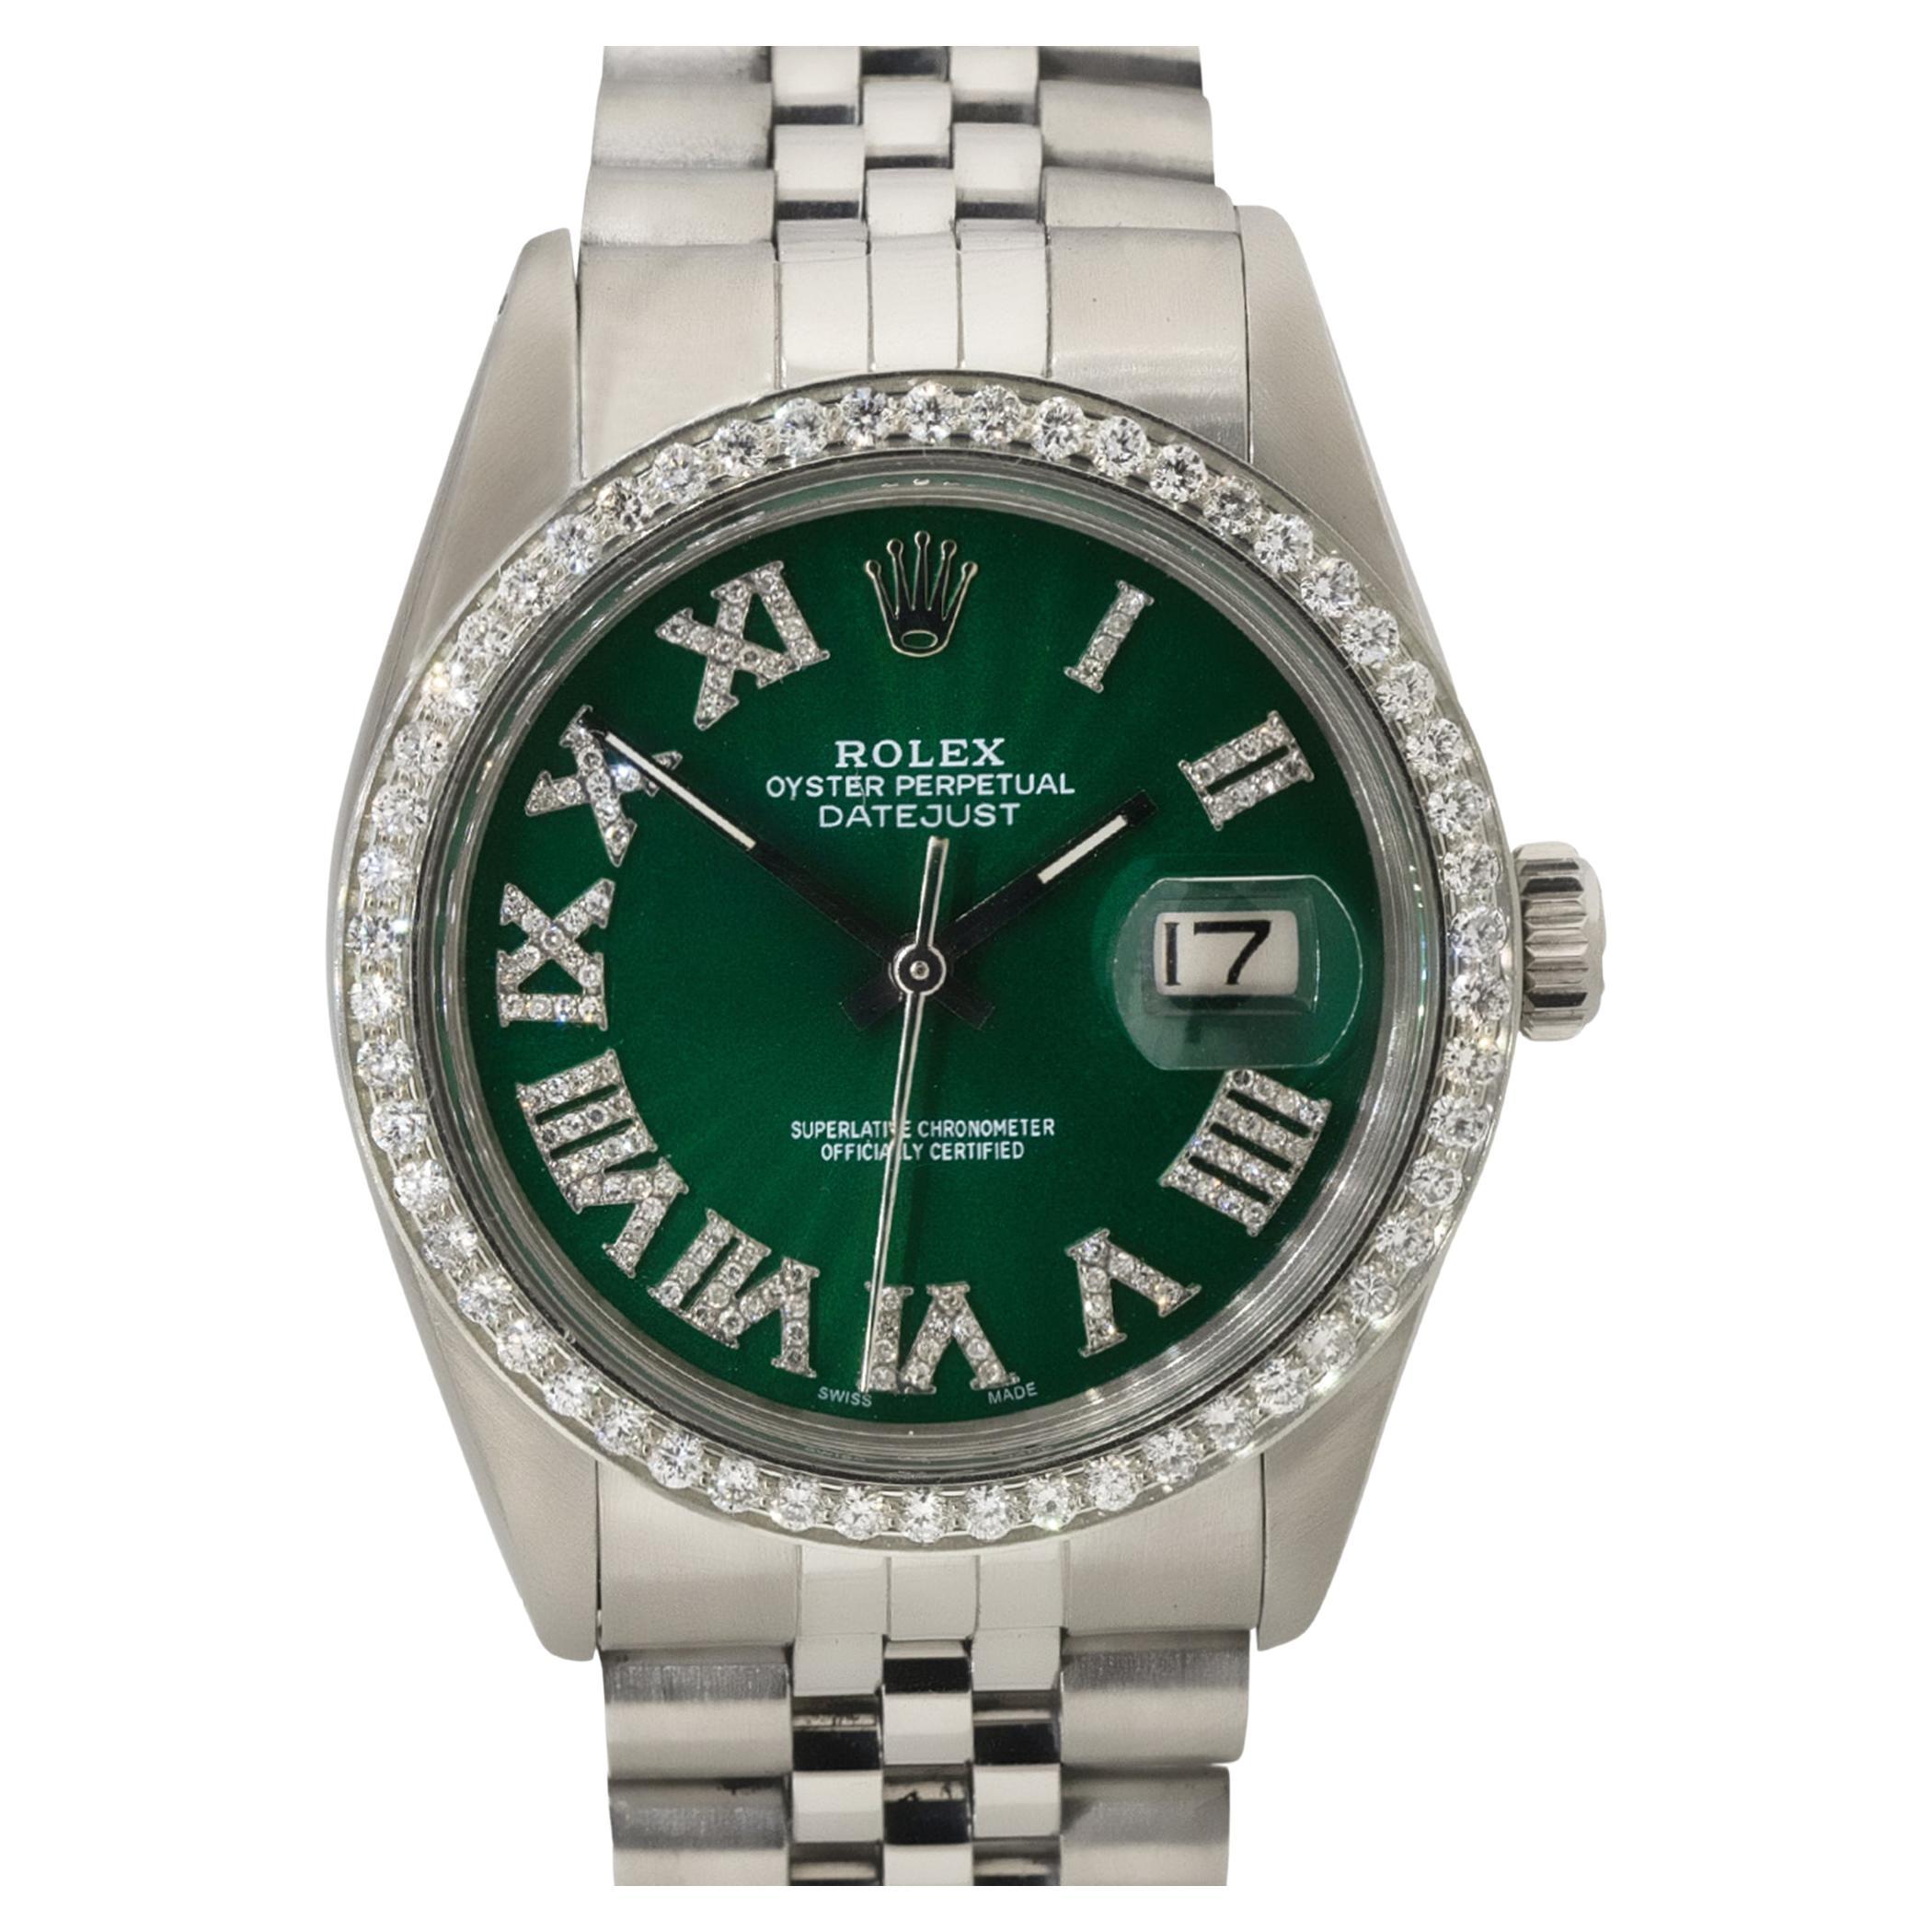 Rolex 16014 Datejust 36mm Stainless Steel Green Diamond Dial Watch For Sale